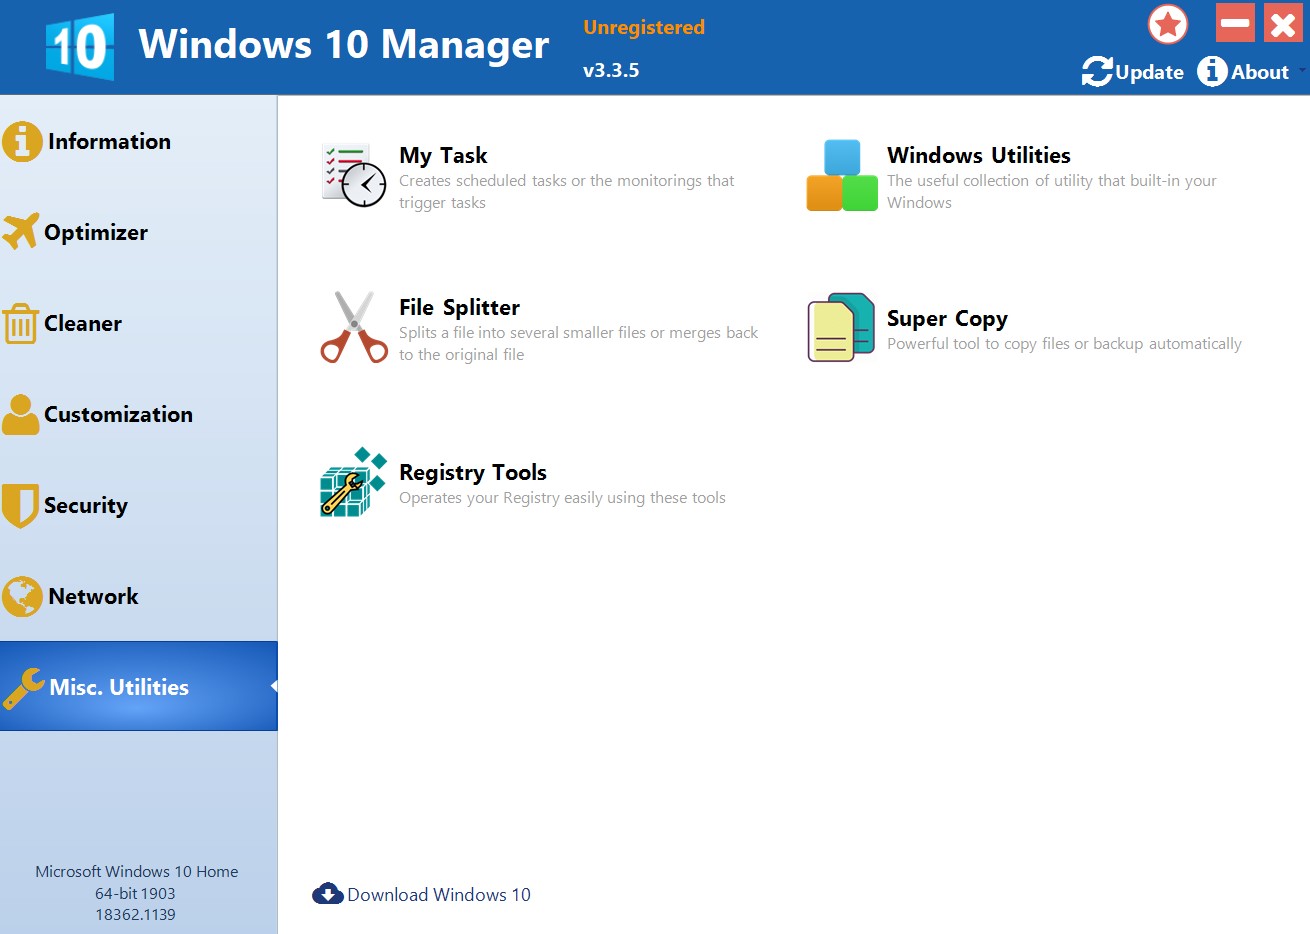 Windows 10 Manager for Windows